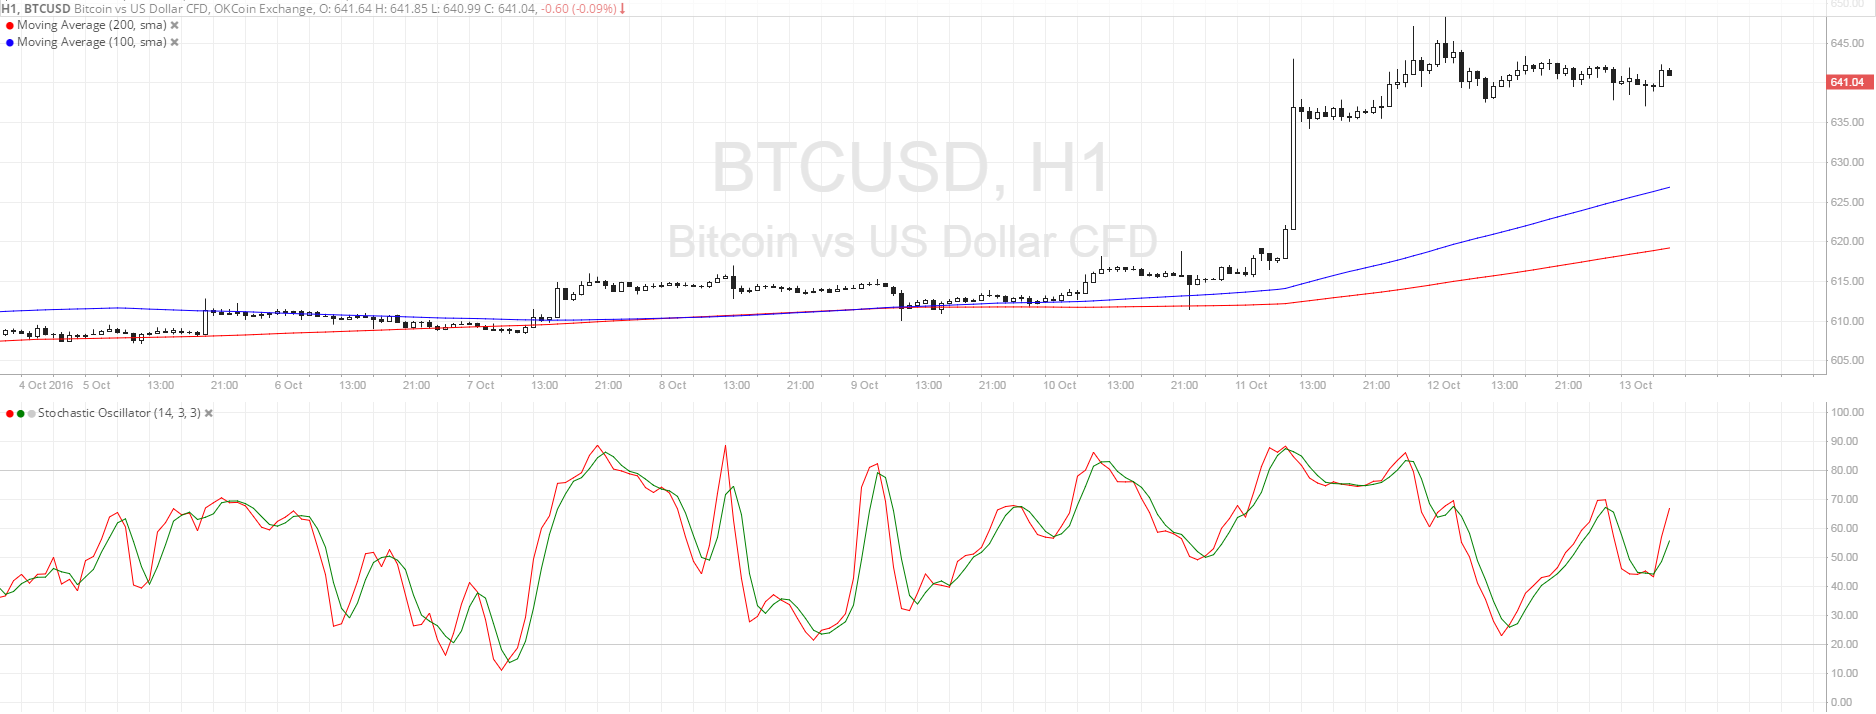 Bitcoin Price Technical Analysis for 10/13/2016 - Buy on Dips?